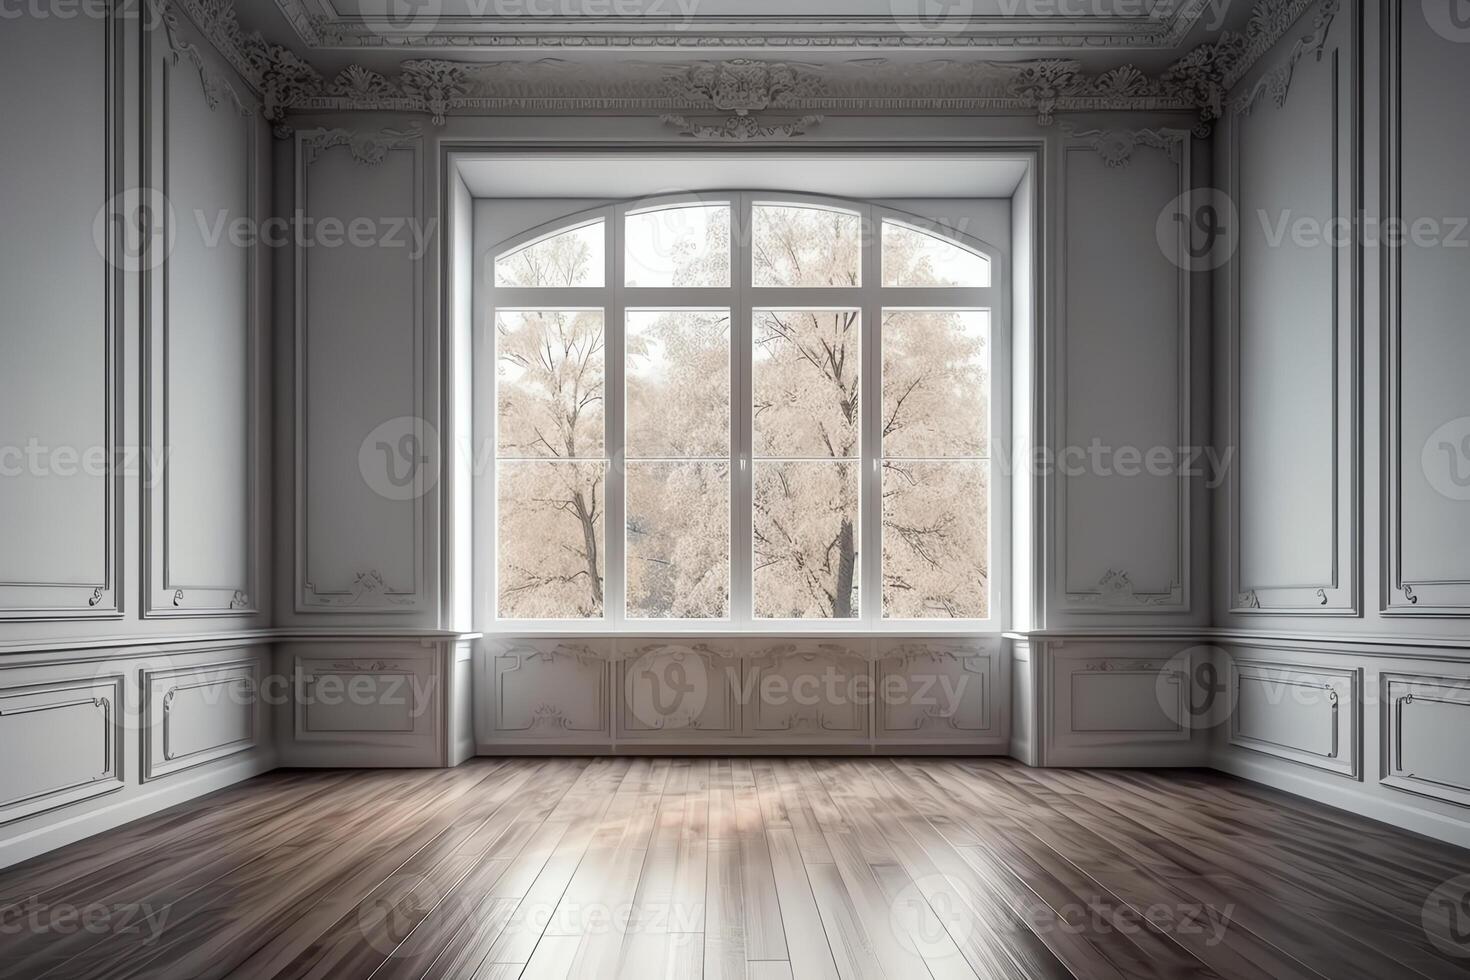 Classical empty room interior 3d render the rooms have wooden floors and gray walls decorate with white moulding there are white window looking out to the nature view. photo